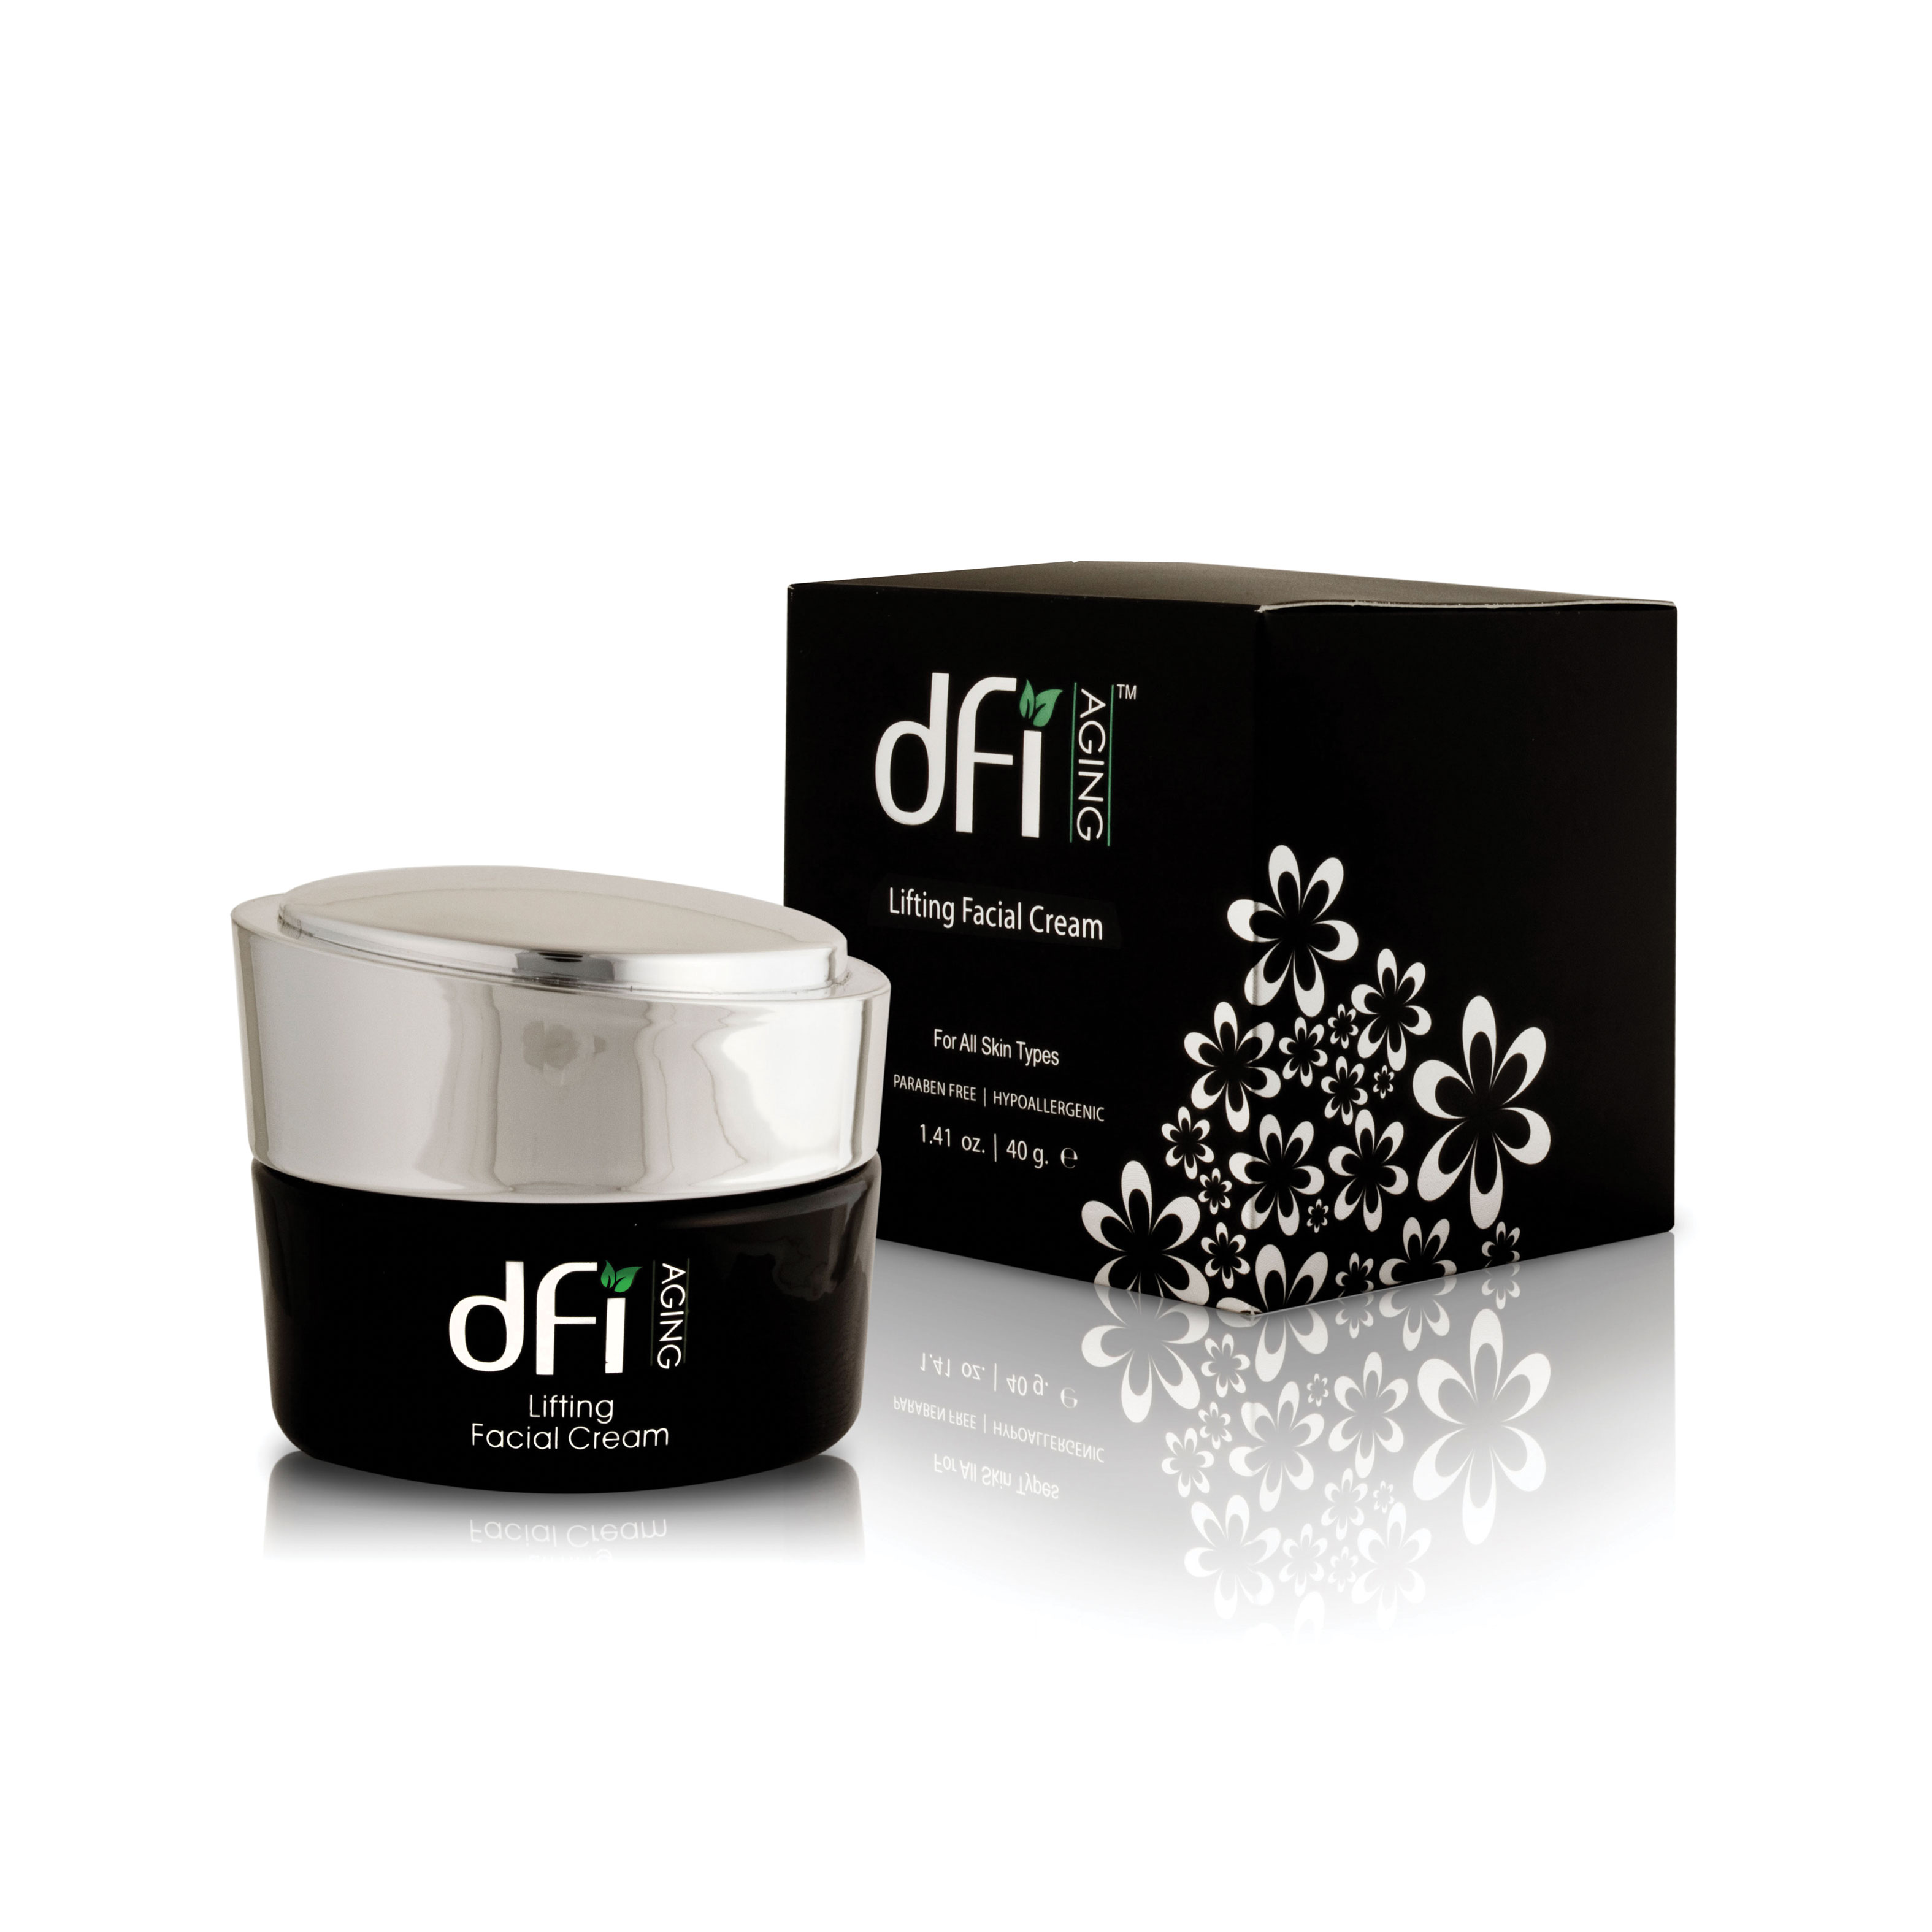 Product Branding and Packaging Design for dfi Aging Skincare's Lifting Facial Cream